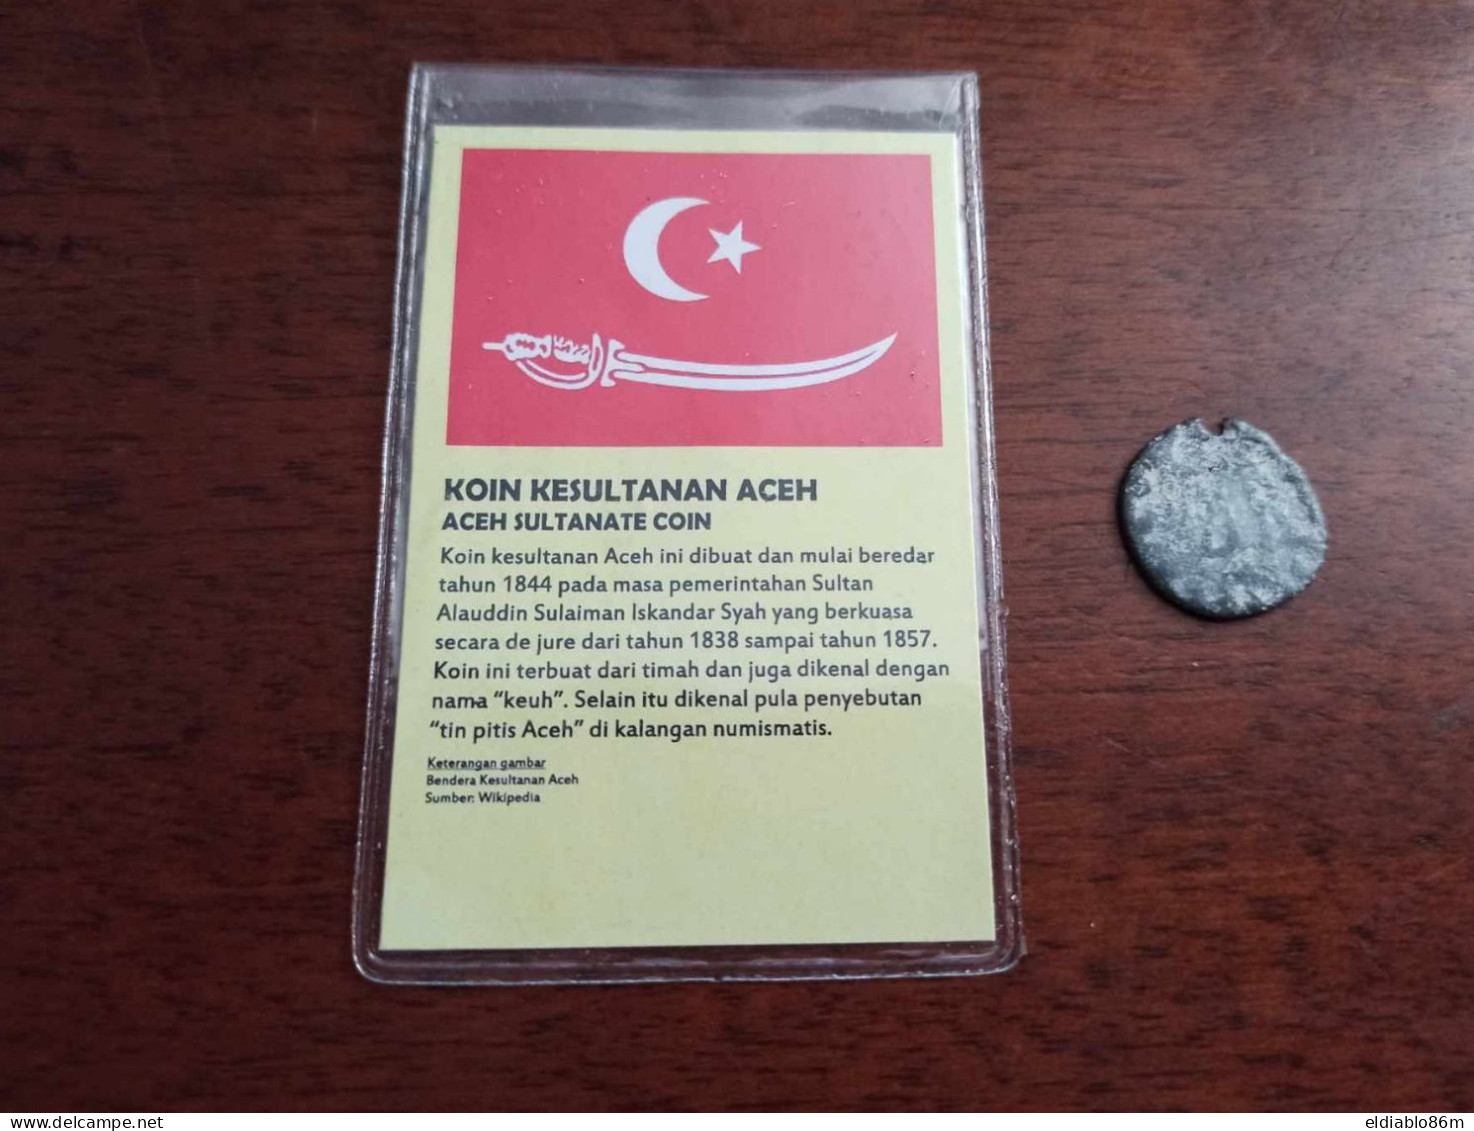 INDONESIA - ACEH SULTANATE COIN - 19TH CENTURY - ONE COIN ON SALE (FRONT BACK PICTURE) - Indonesien